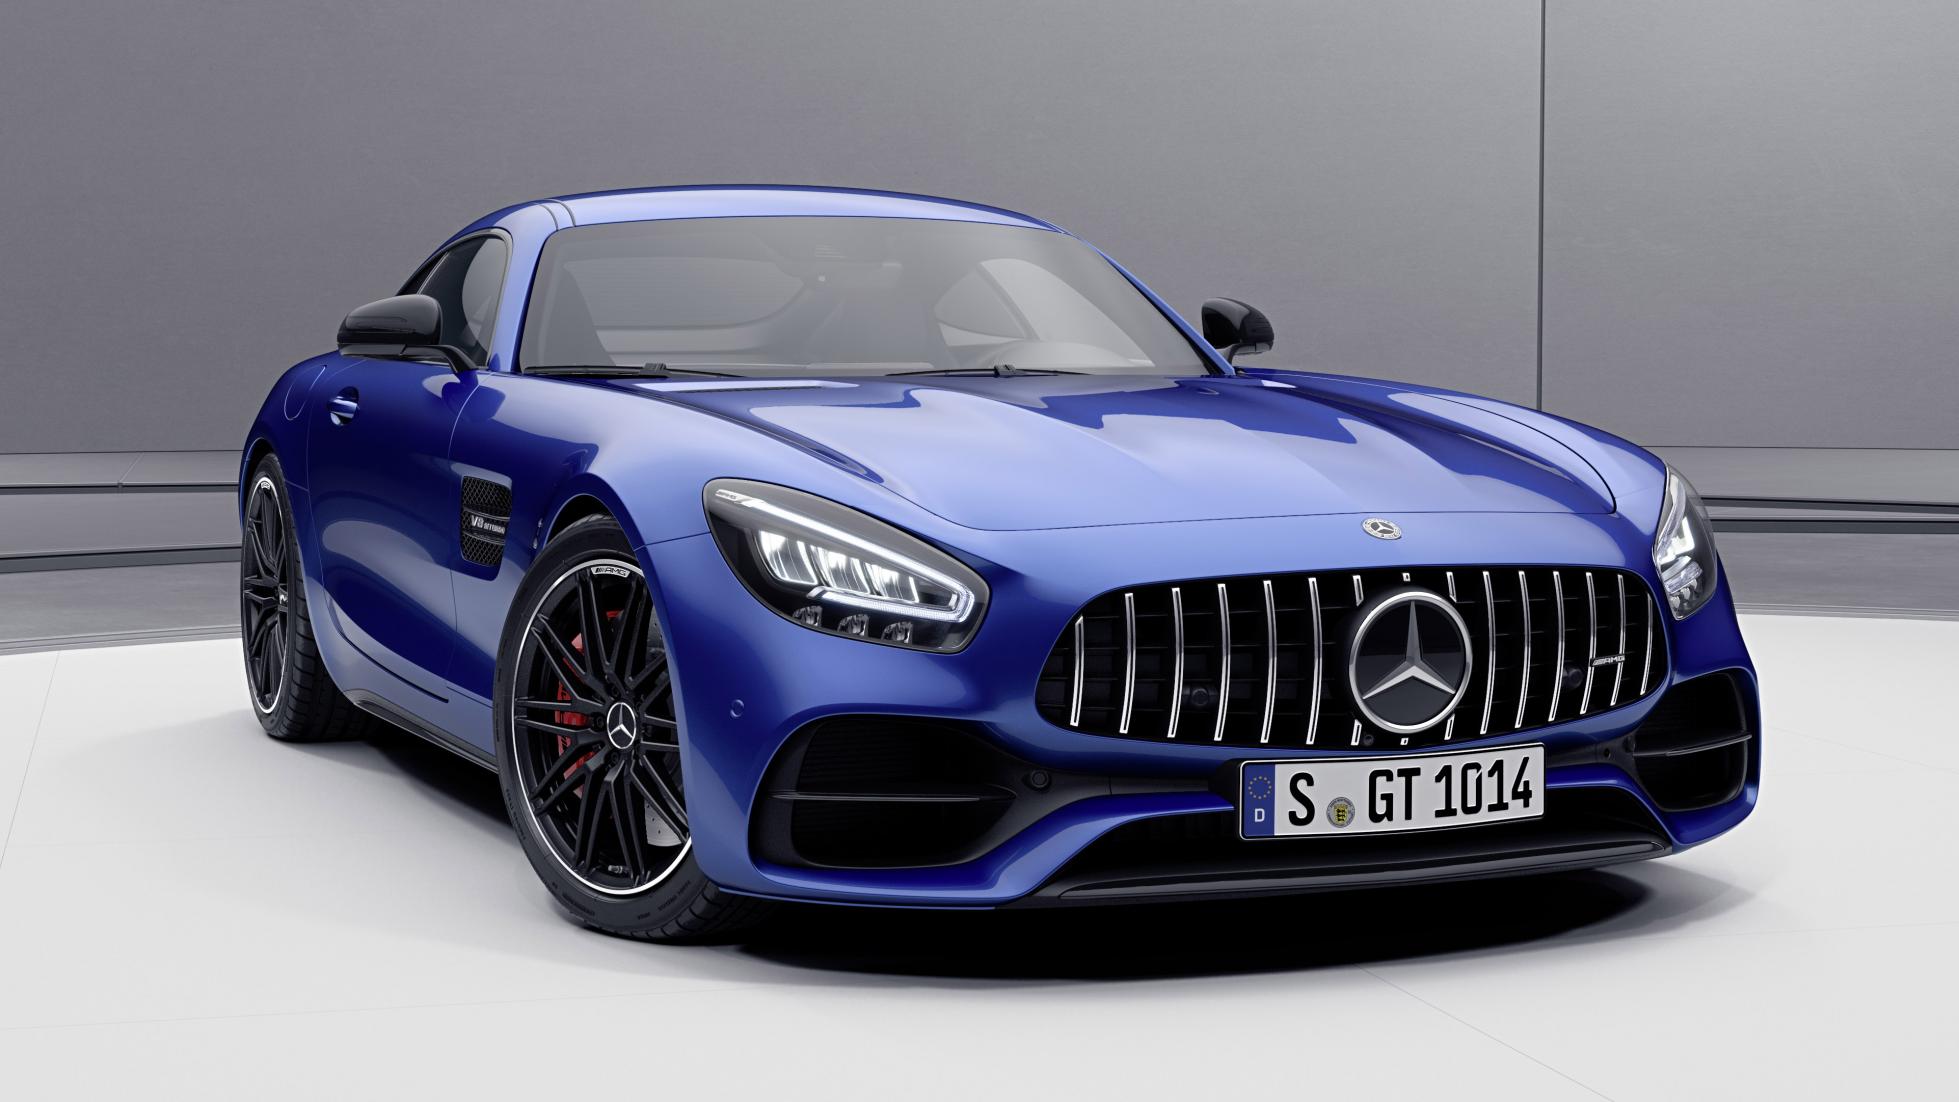 Merc has replaced the AMG GT S… with an AMG GT